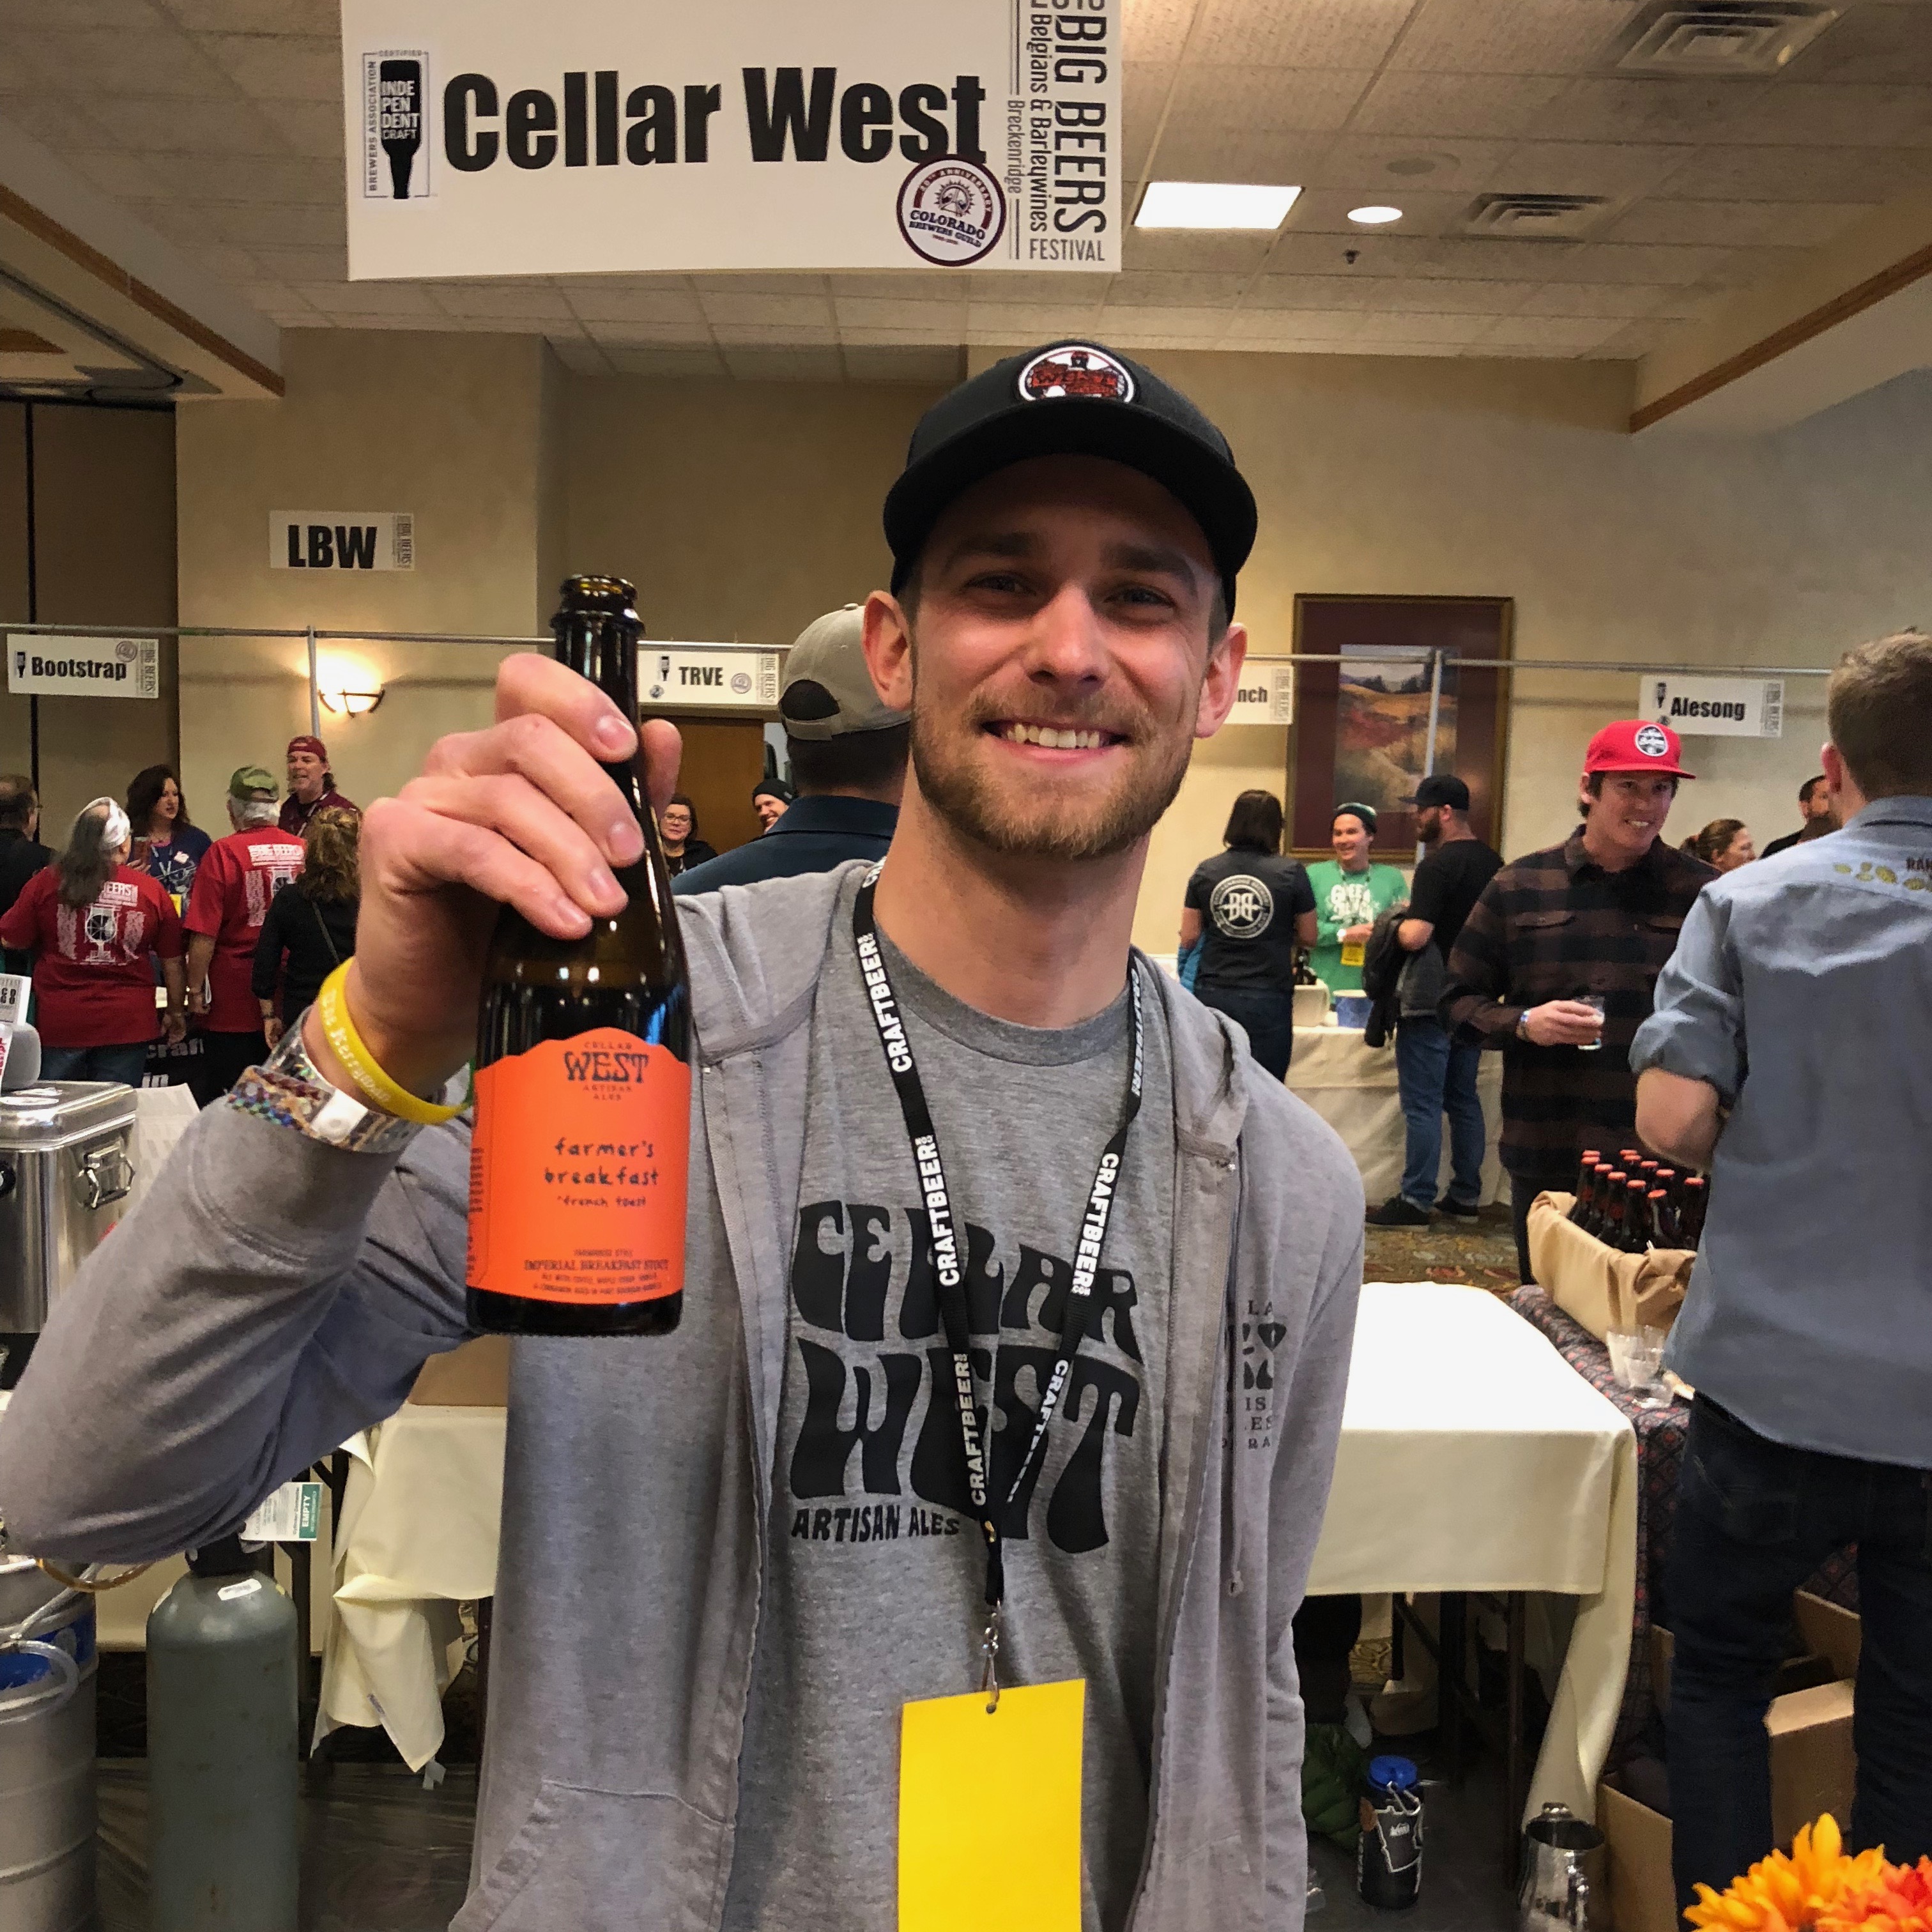 Zach Nichols from Cellar West pouring his beers at the 2018 Big Beers, Belgians & Barleywines Festival.